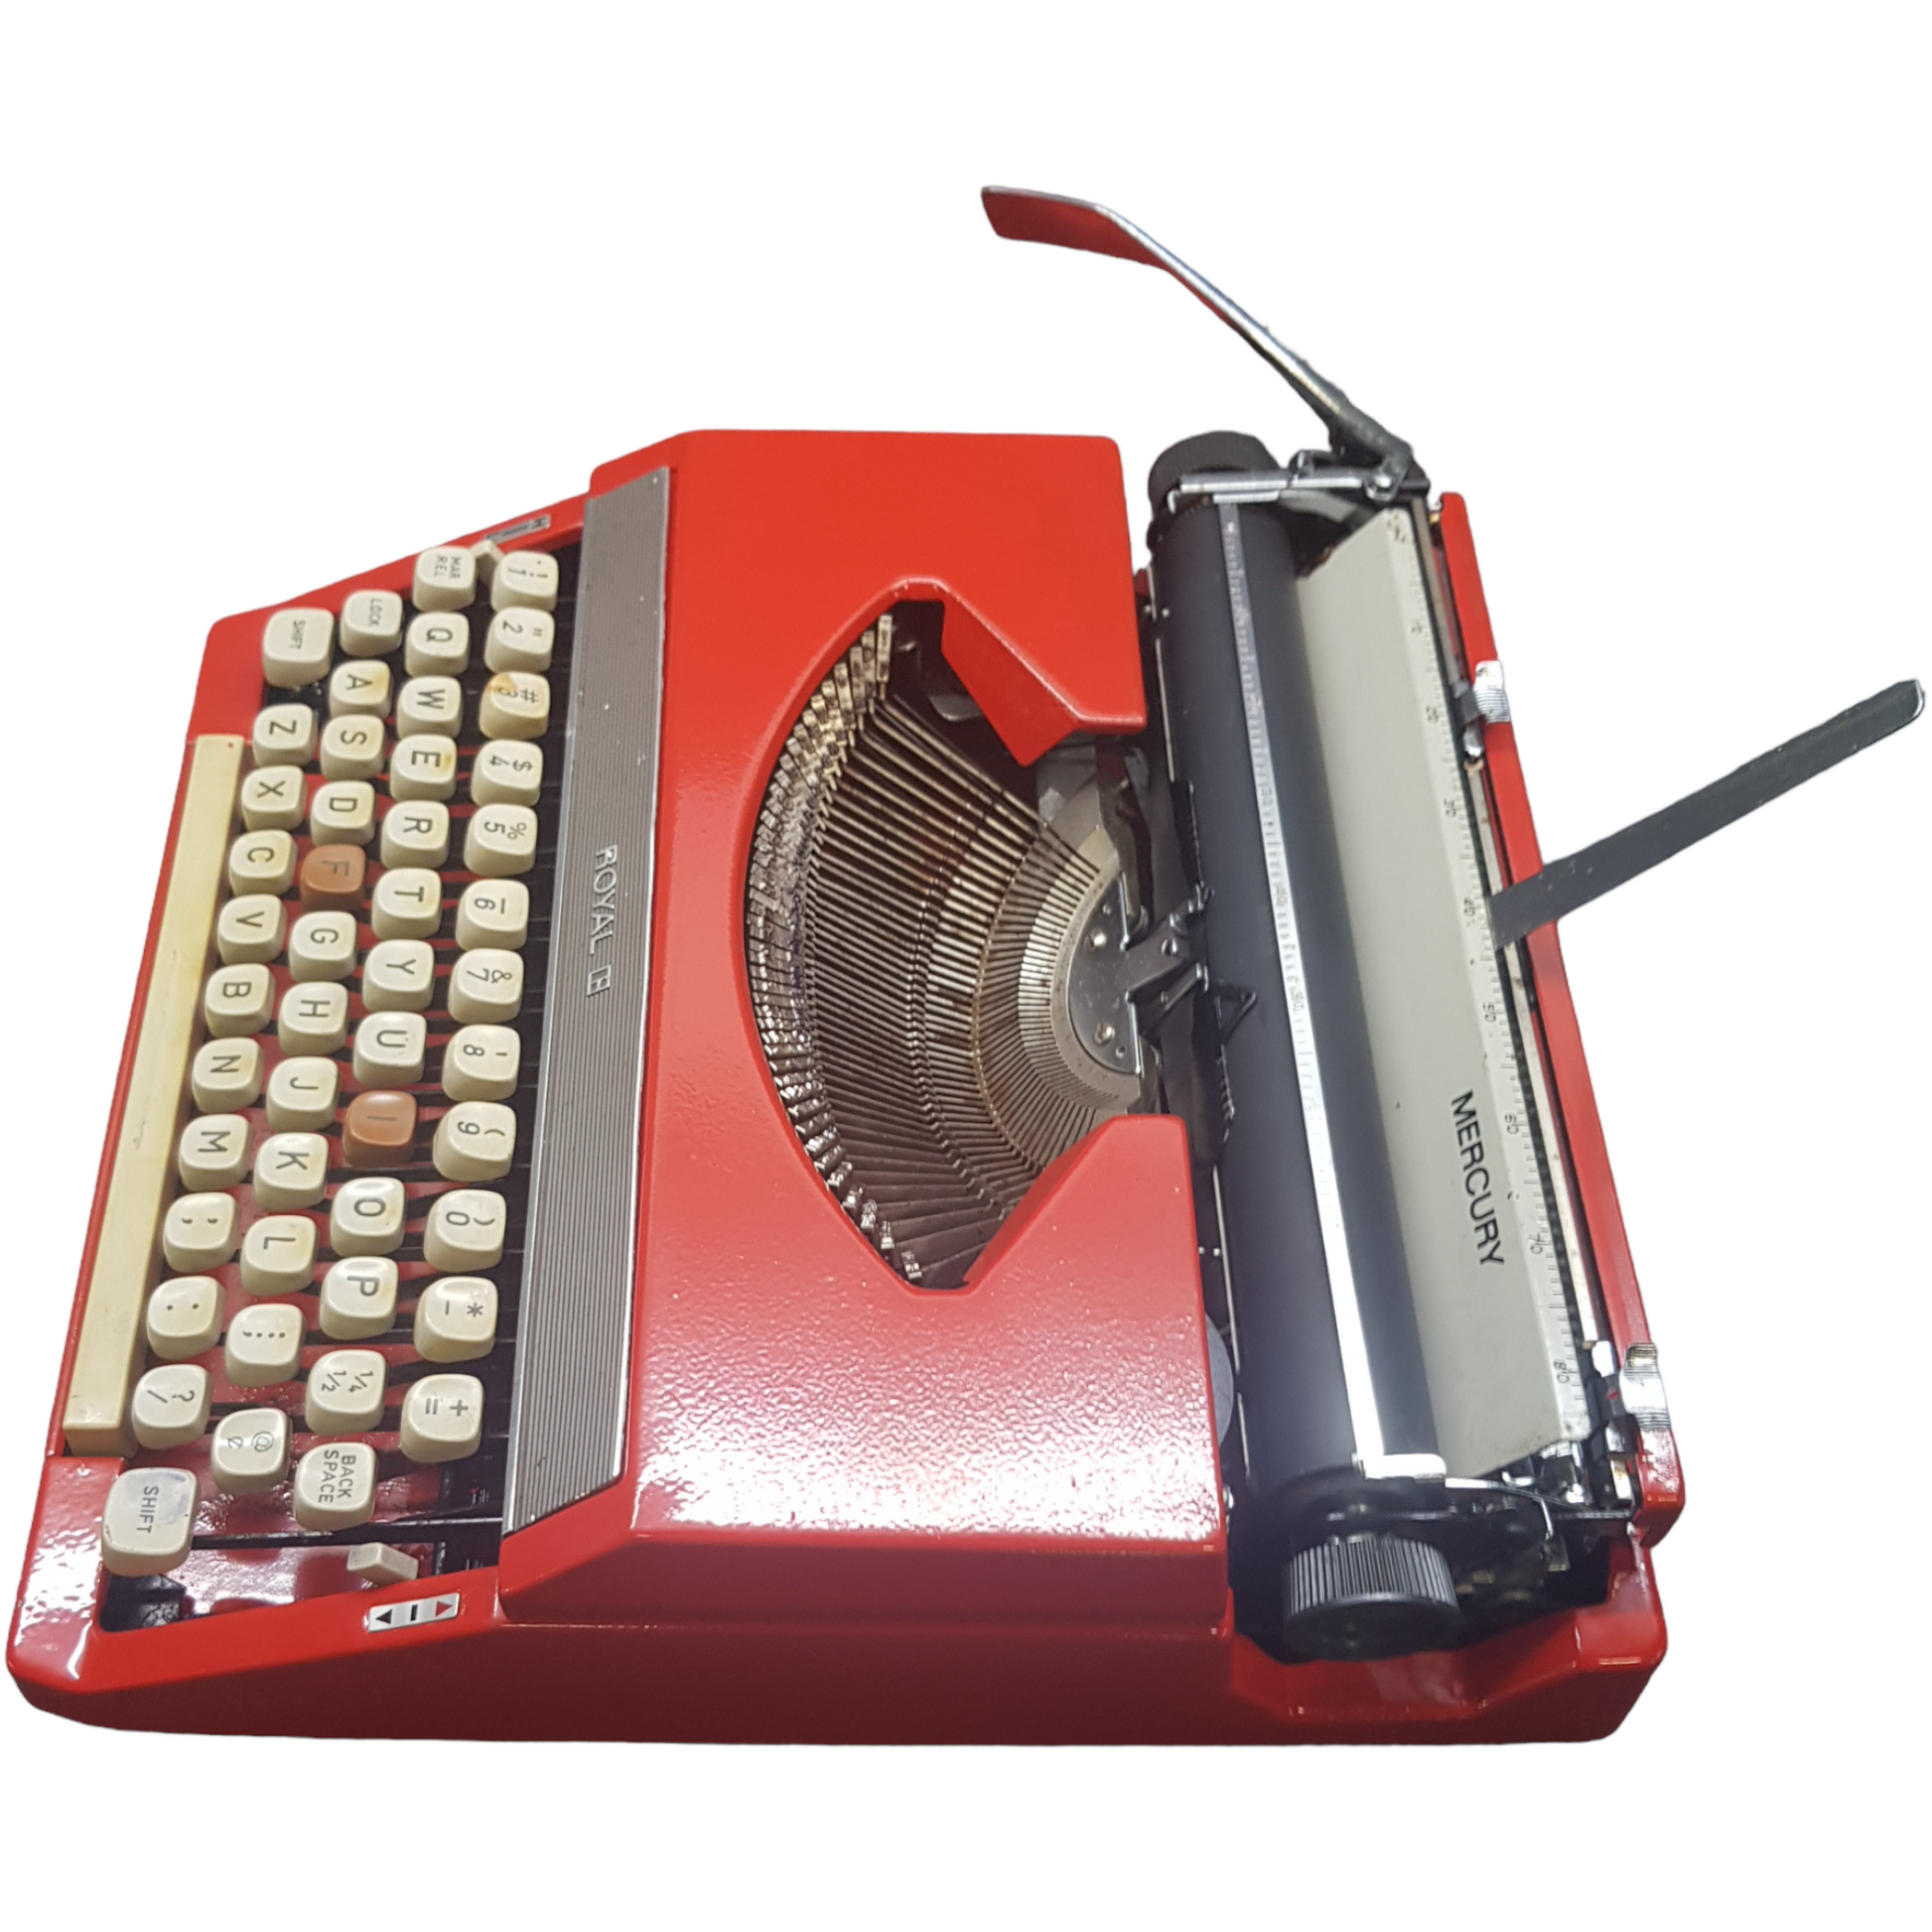 Image of Royal Mercury Typewriter. A Portable typewriter. Made in Japan. Painted Red. Available from Universal Typewriter Company.